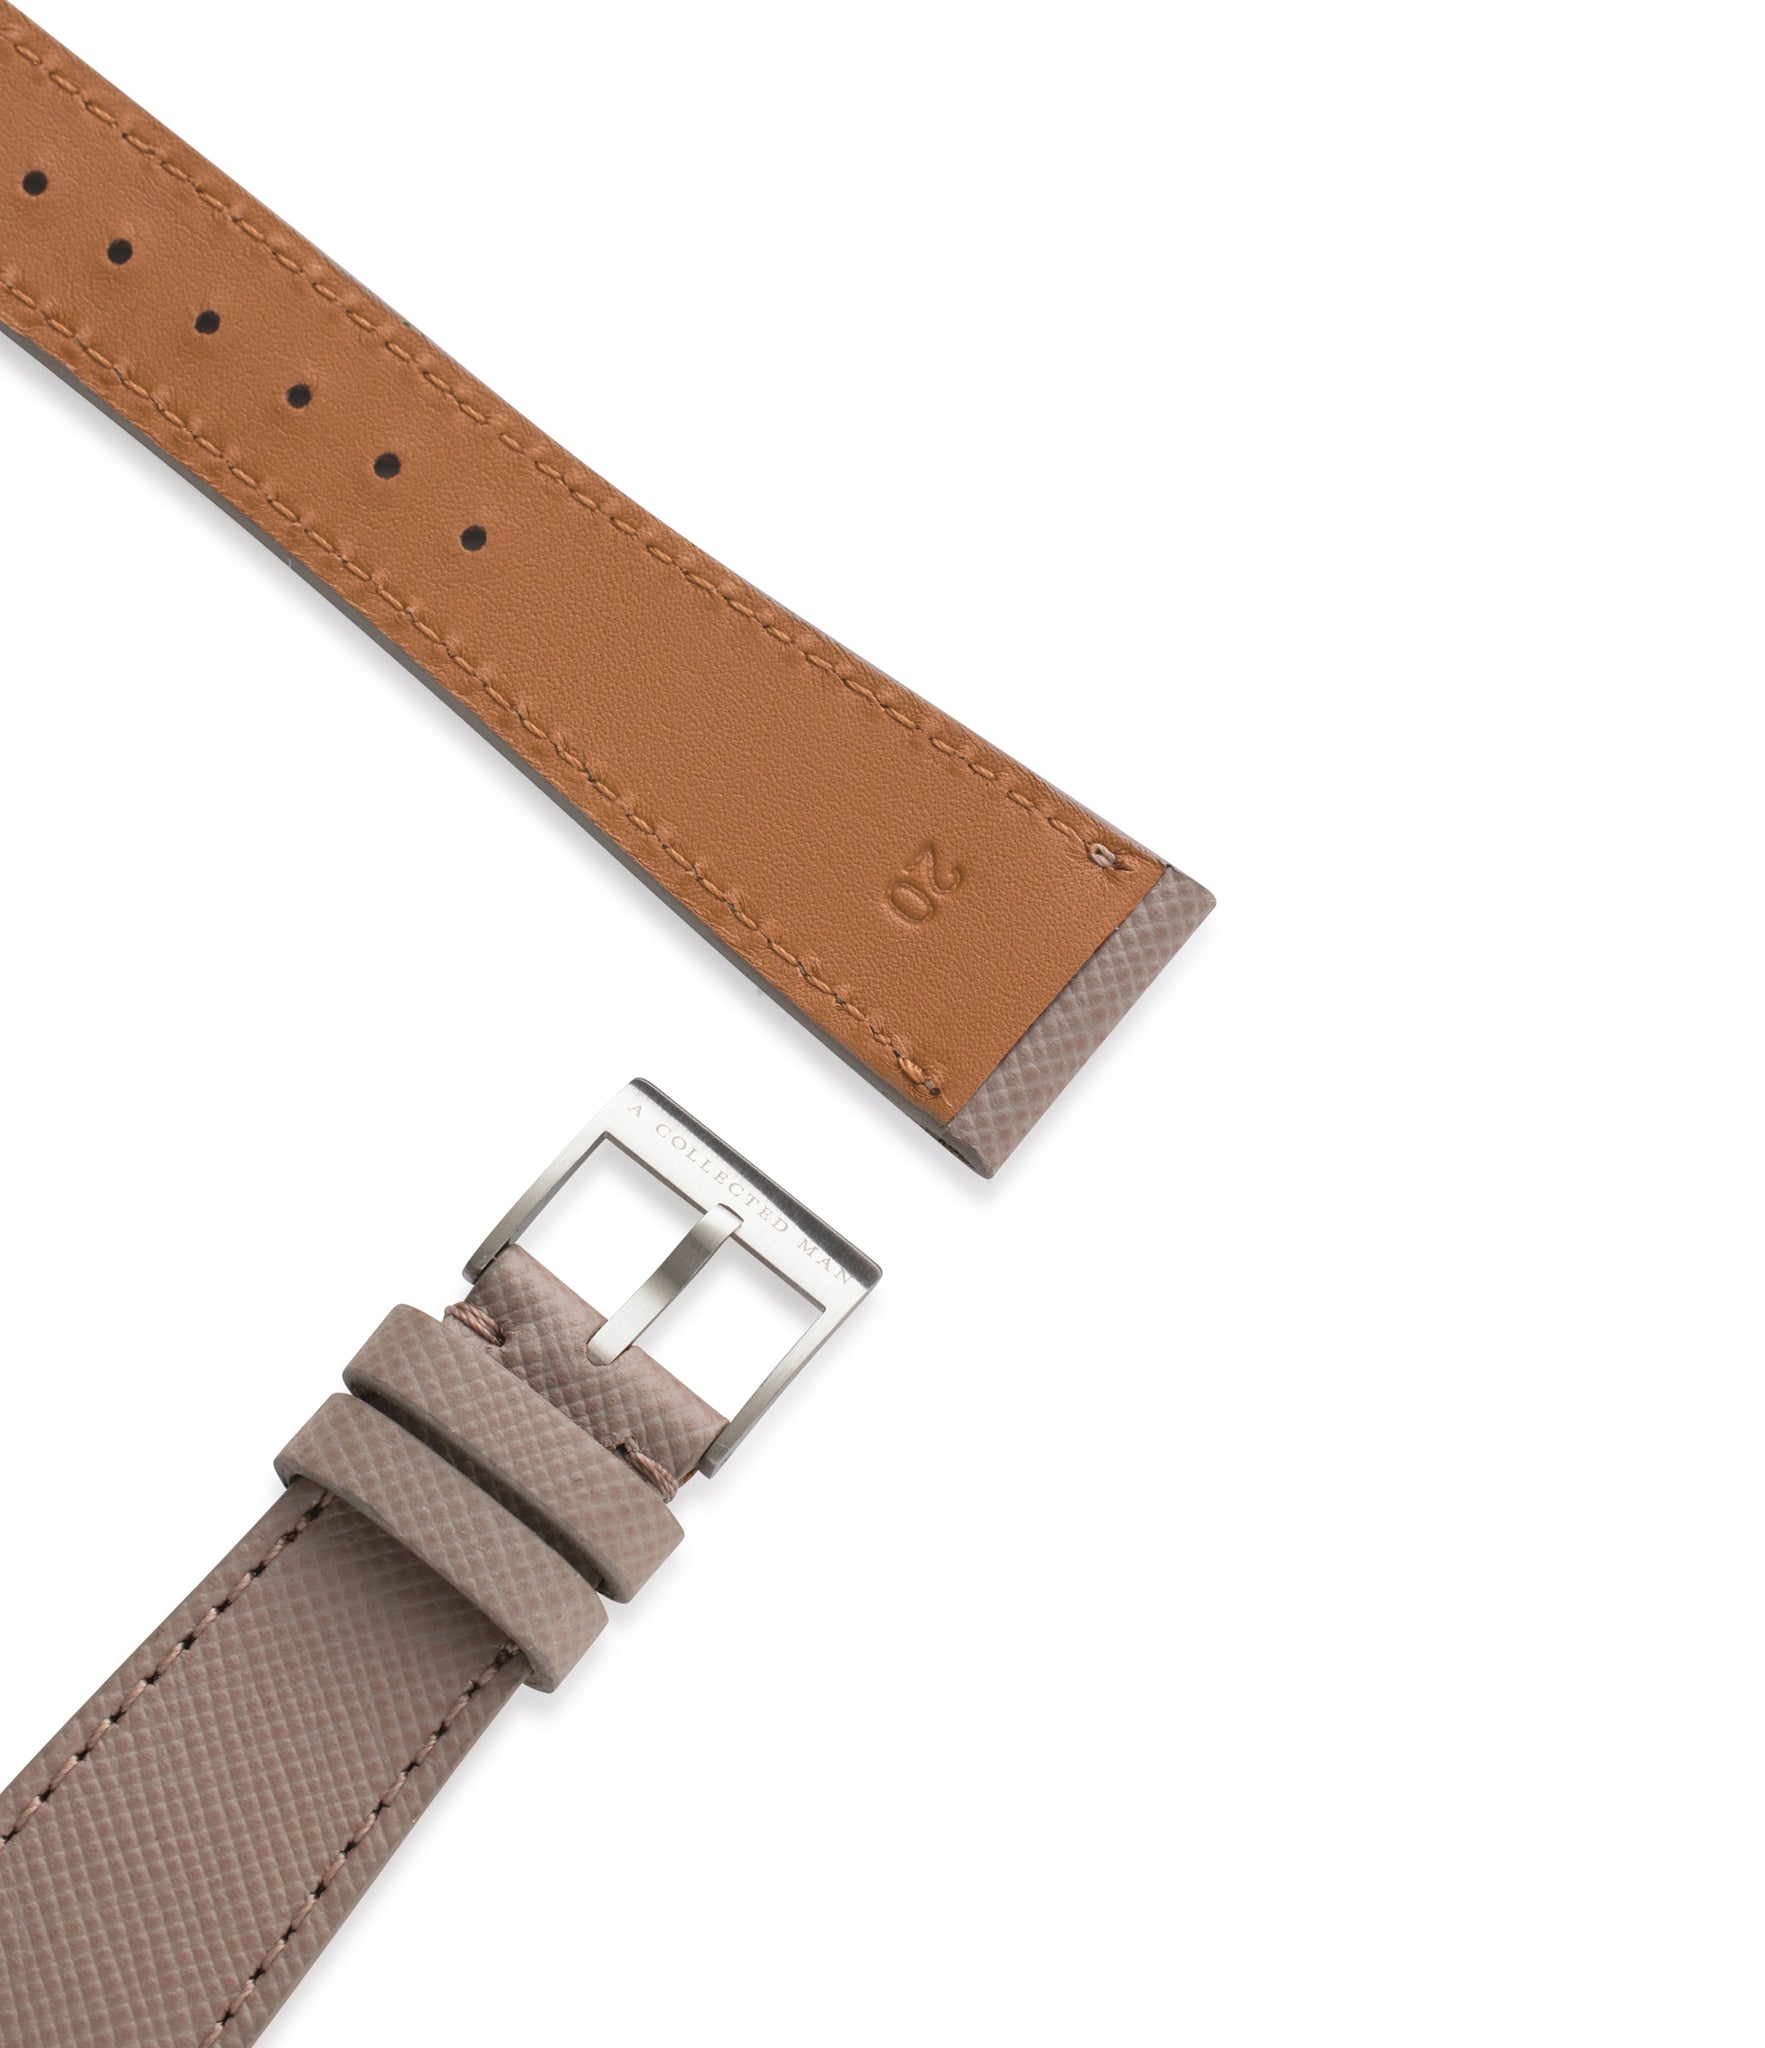 Buy saffiano quality watch strap in mauve beige taupe from A Collected Man London, in short or regular lengths. We are proud to offer these hand-crafted watch straps, thoughtfully made in Europe, to suit your watch. Available to order online for worldwide delivery.